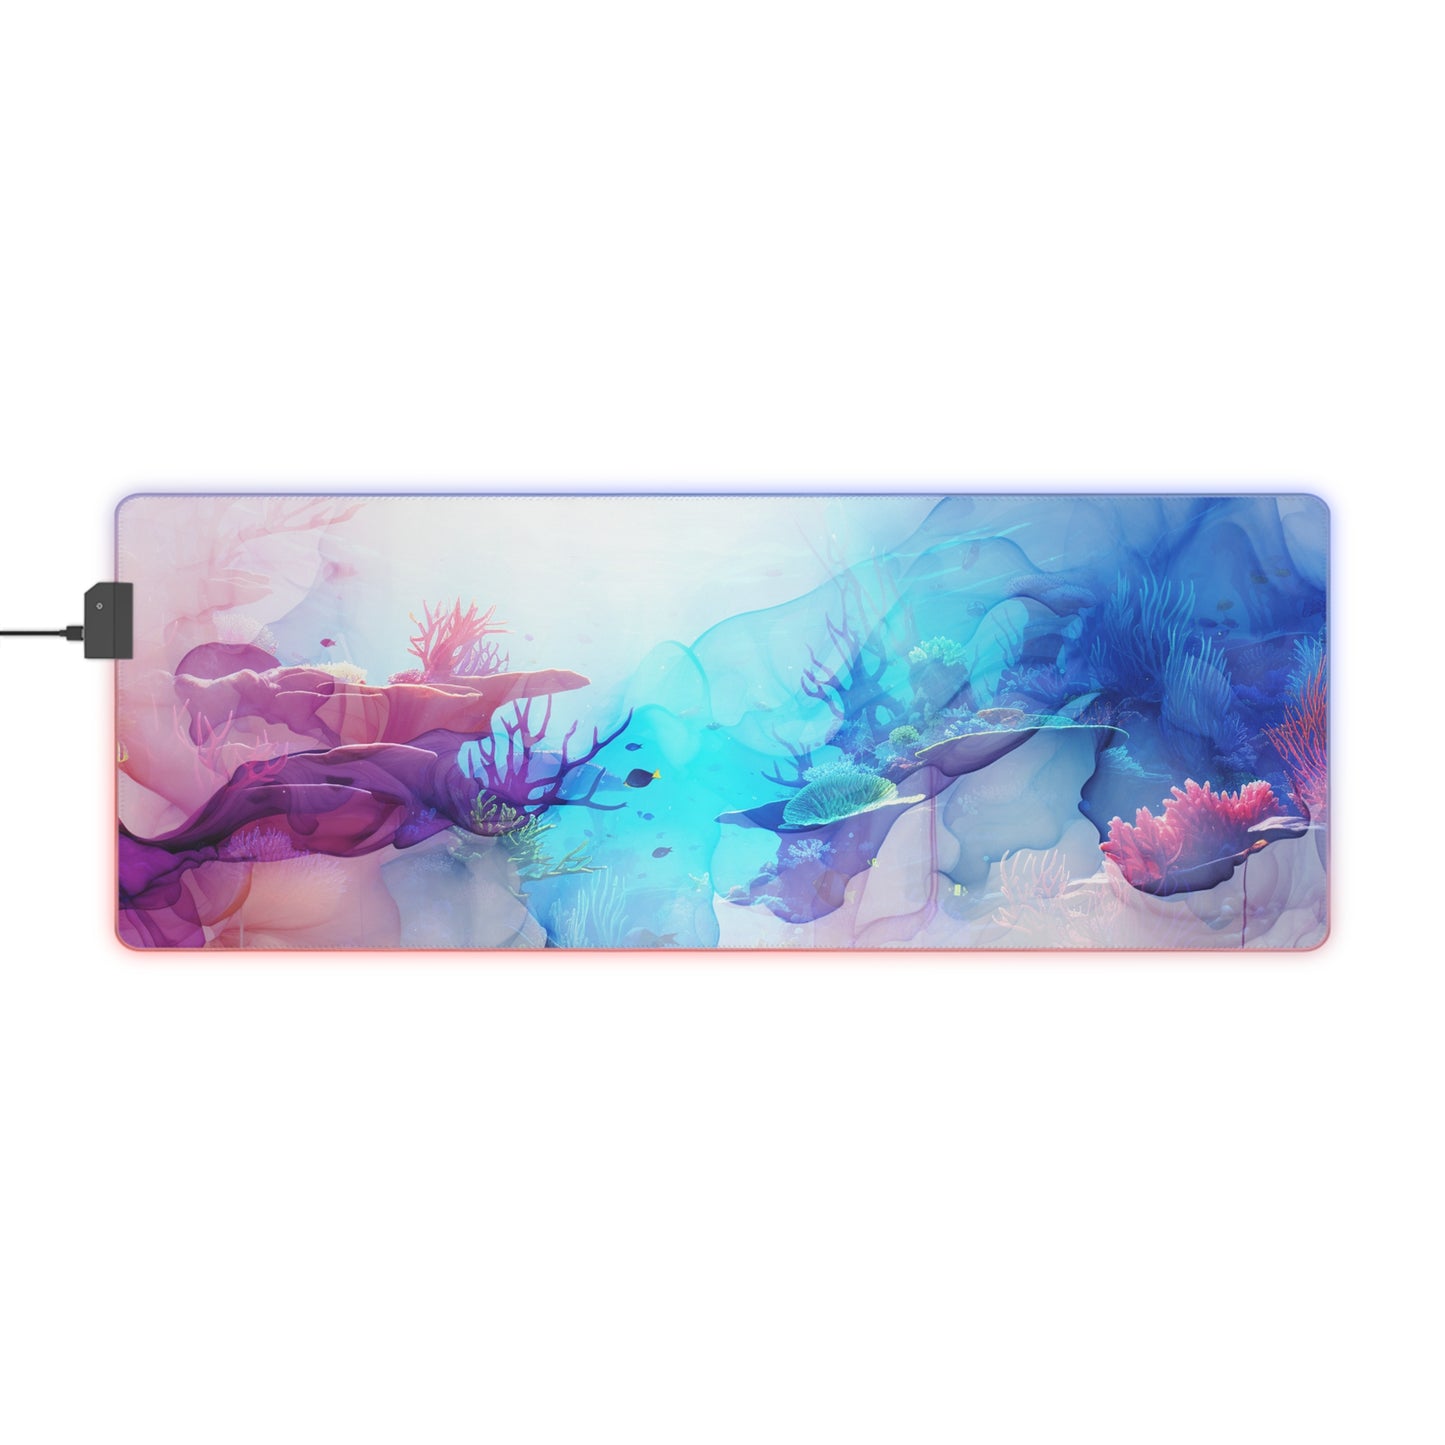 Neduz Designs Coral Reef LED Gaming Mouse Pad - Vivid Dreams Collection